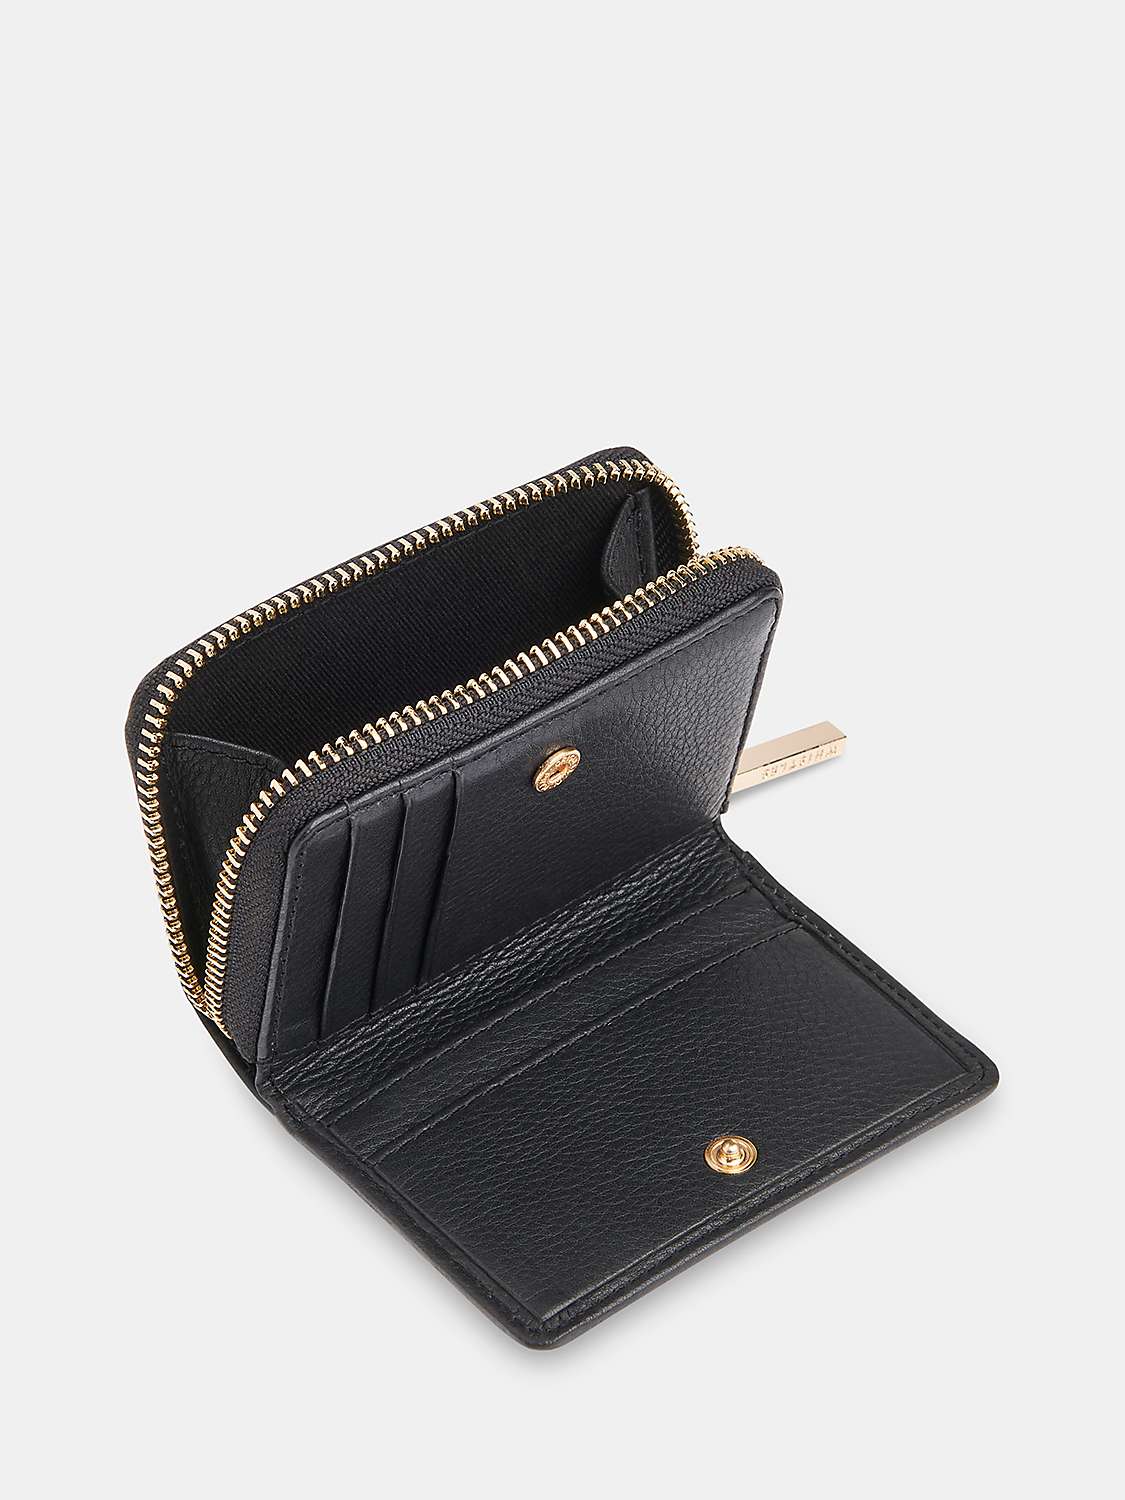 Buy Whistles Koa Compact Zip Around Leather Purse Online at johnlewis.com